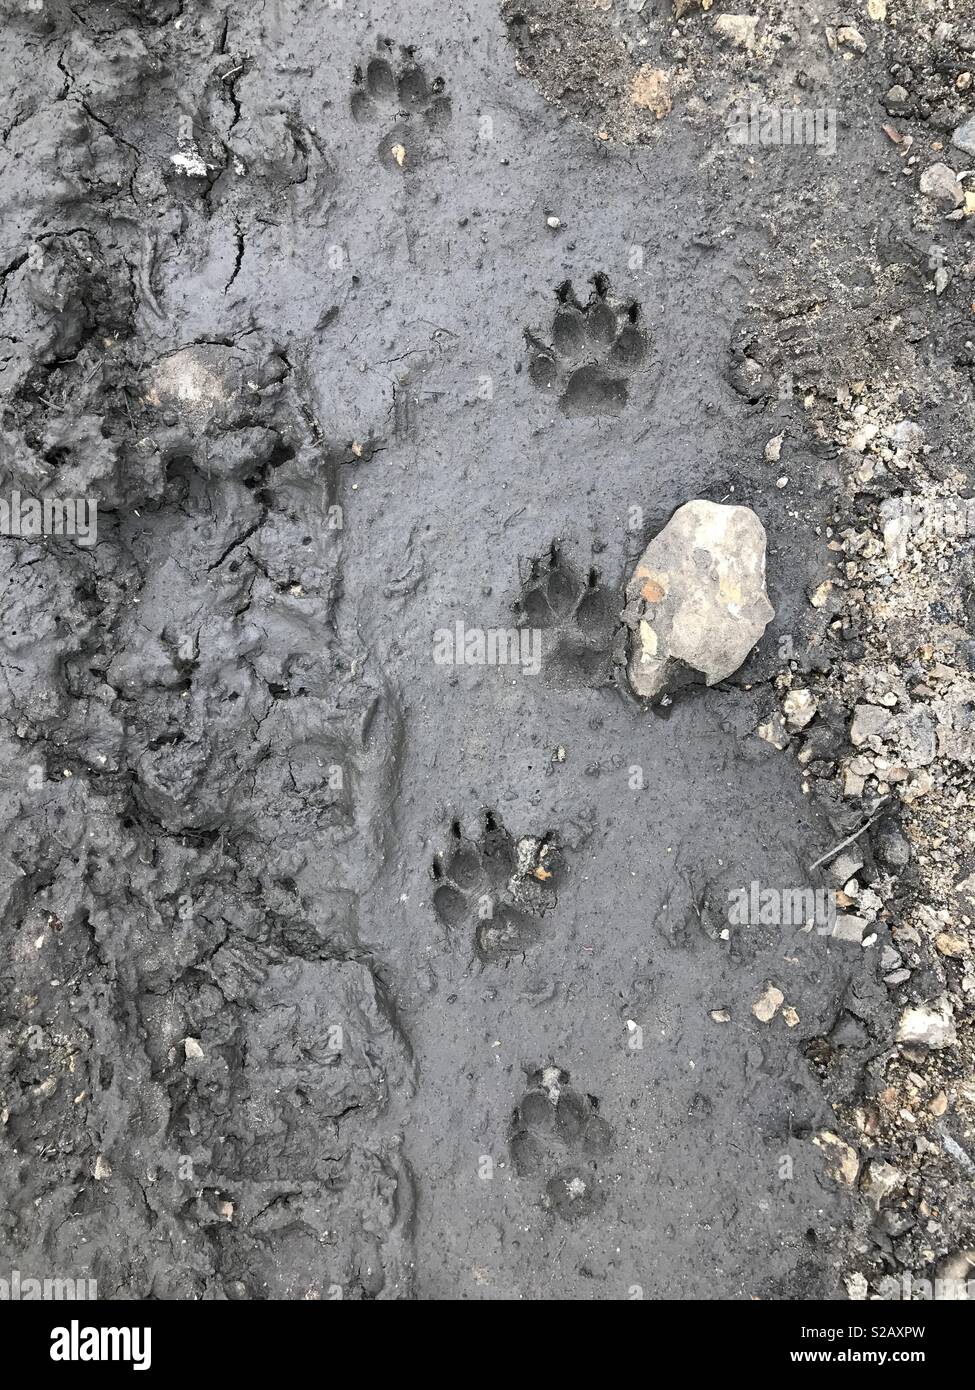 Paw prints in mud Stock Photo